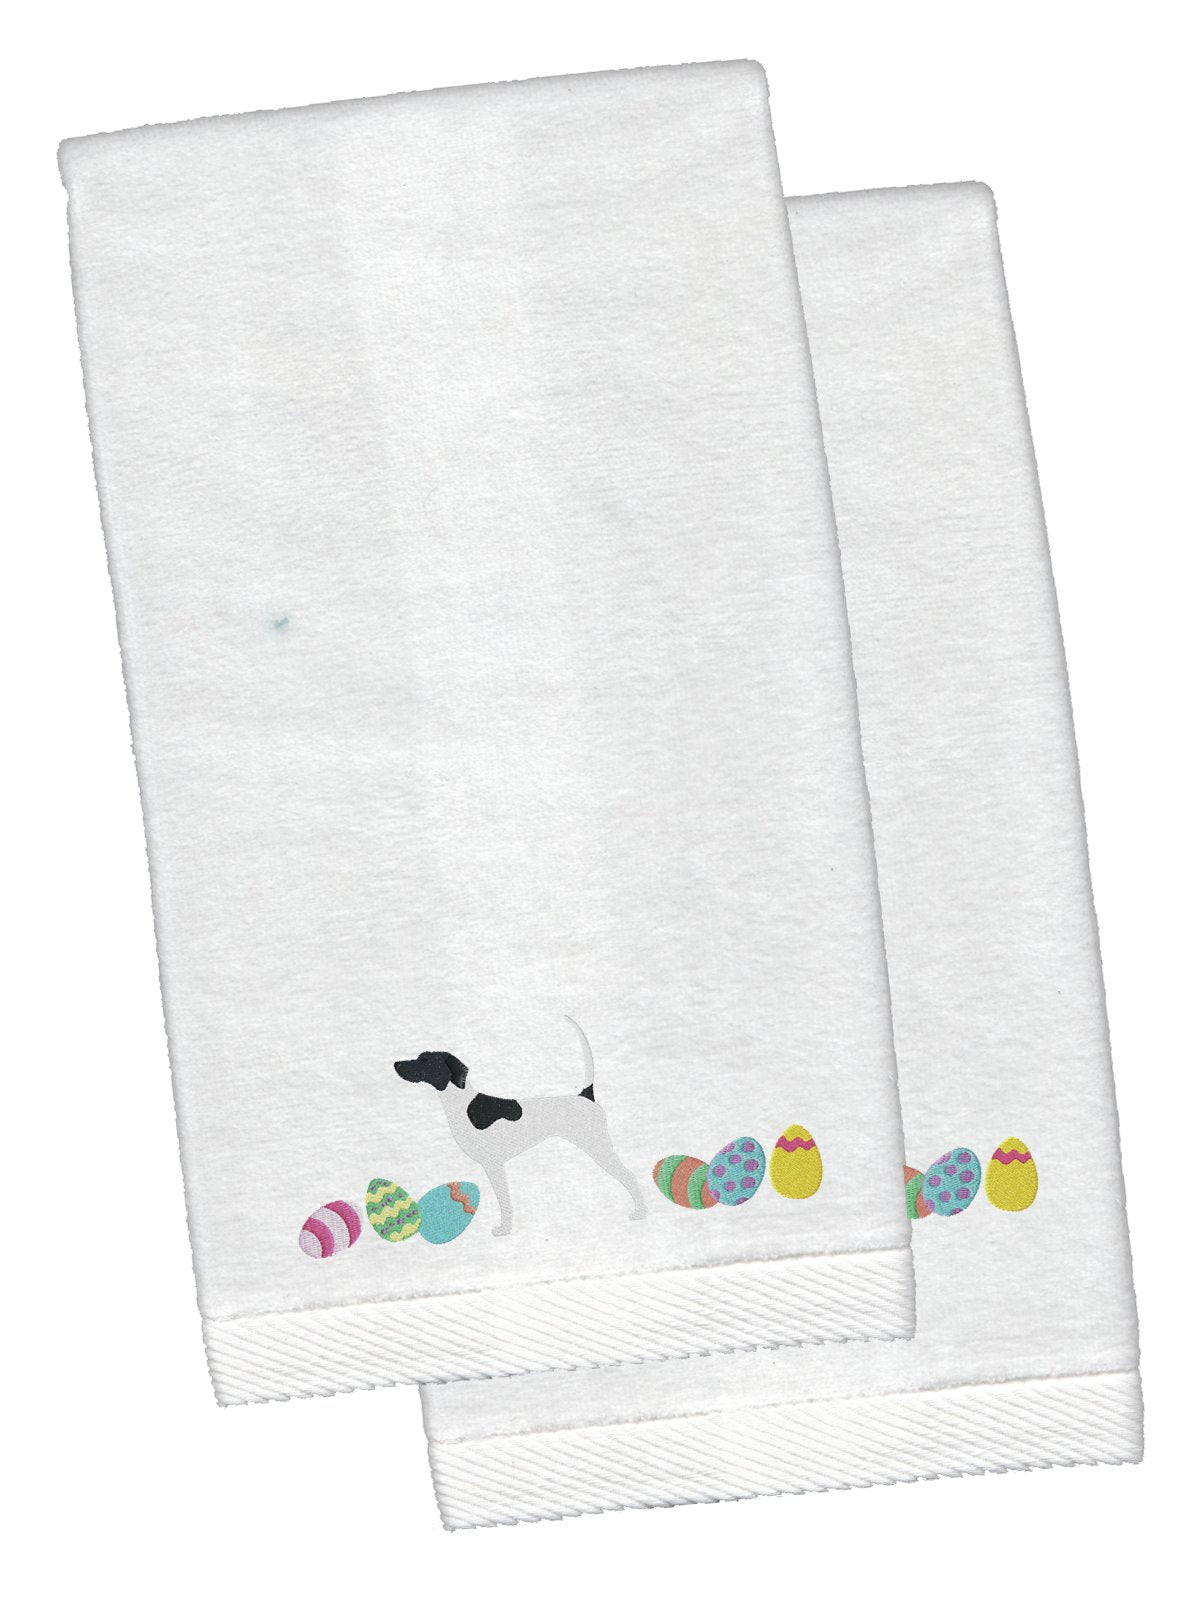 English Pointer Easter White Embroidered Plush Hand Towel Set of 2 CK1639KTEMB by Caroline's Treasures